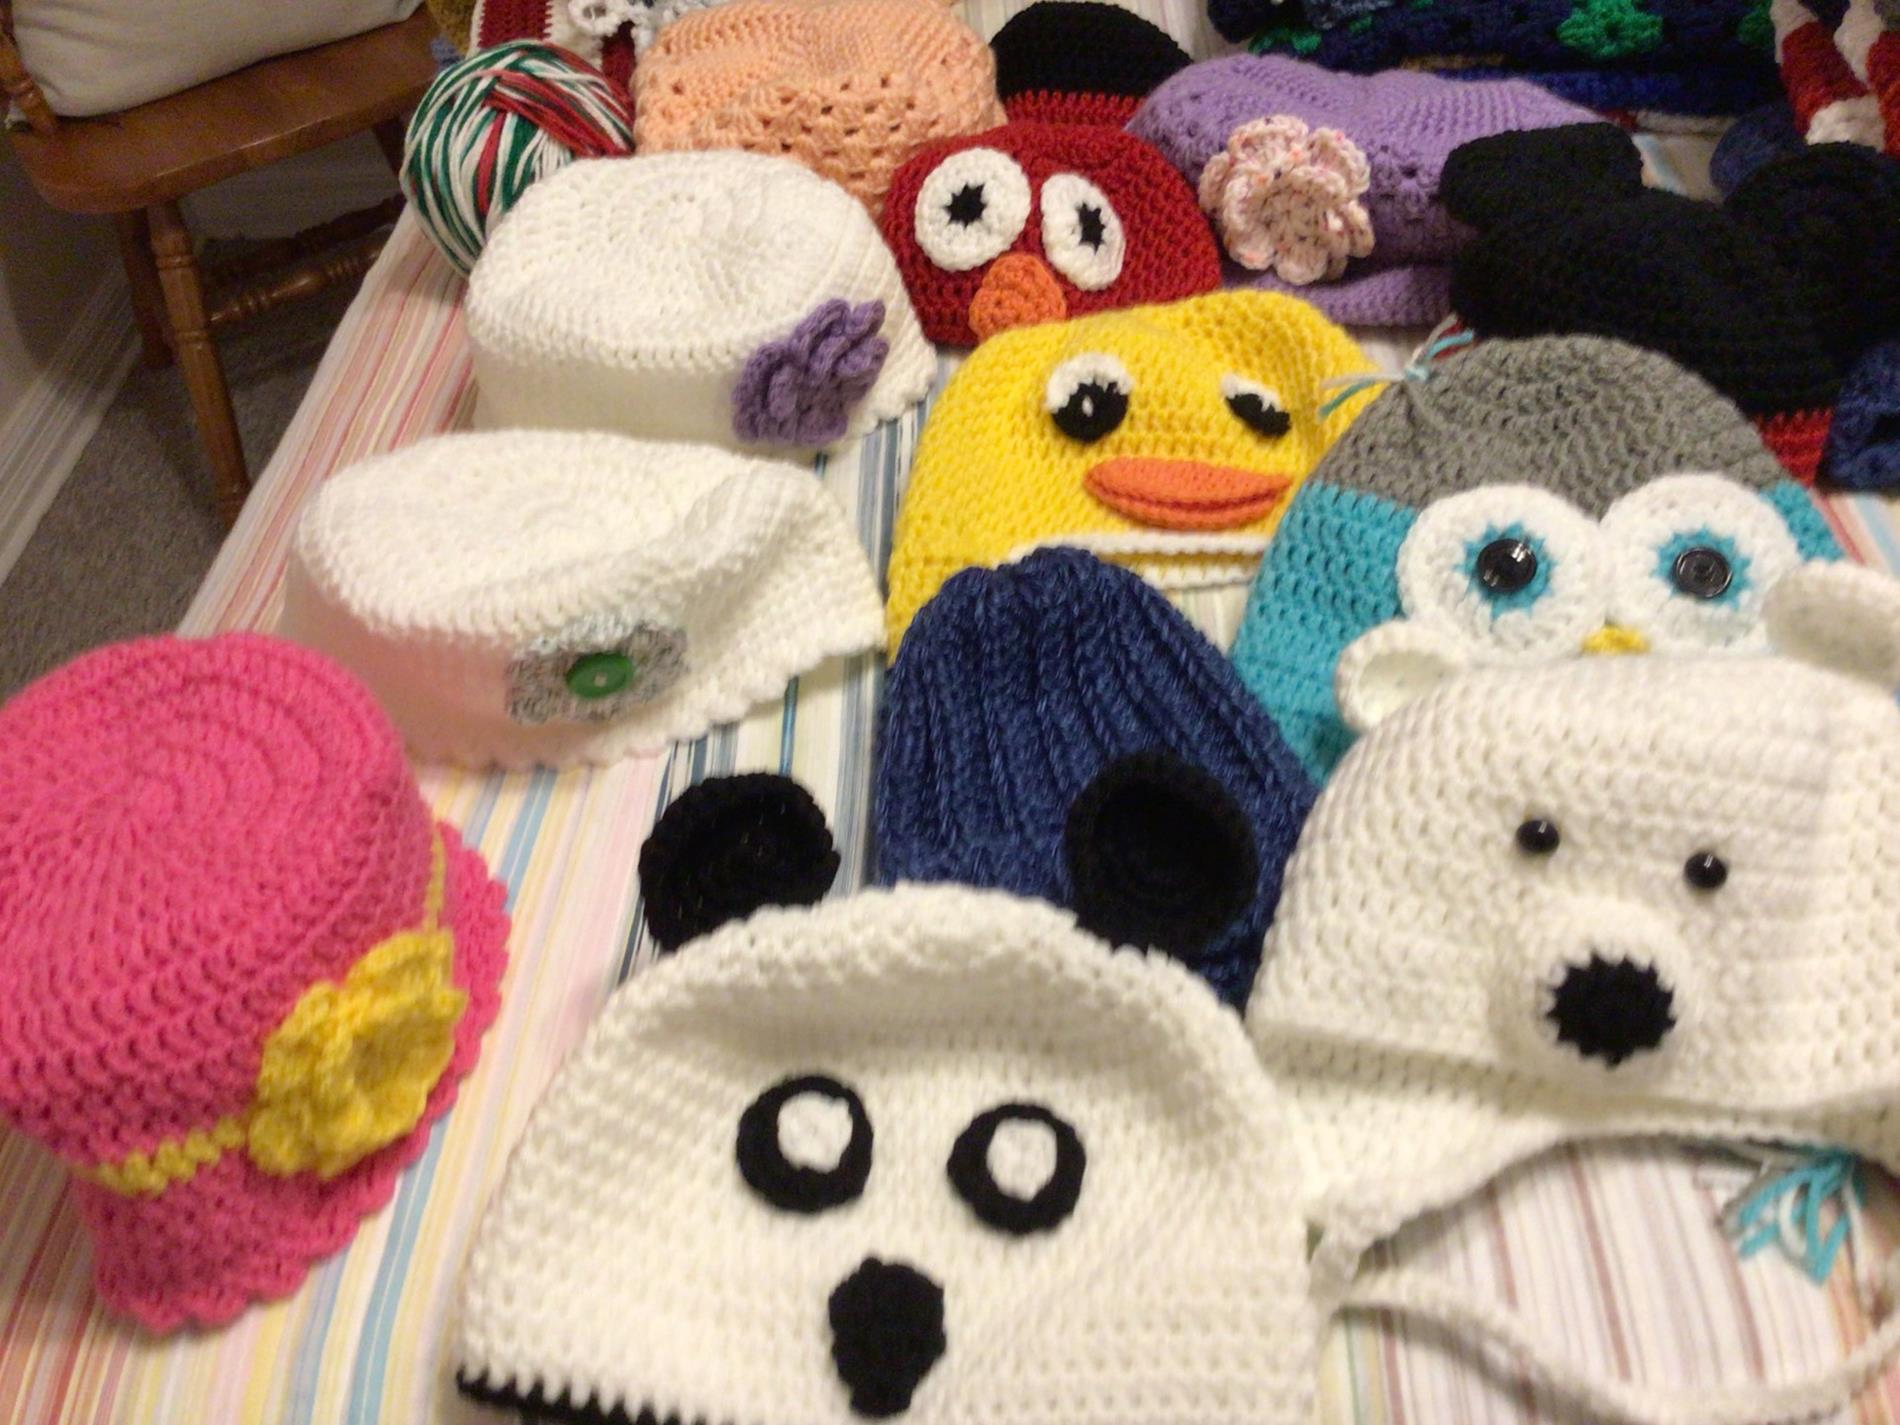 Hats made for Ronald McDonald House